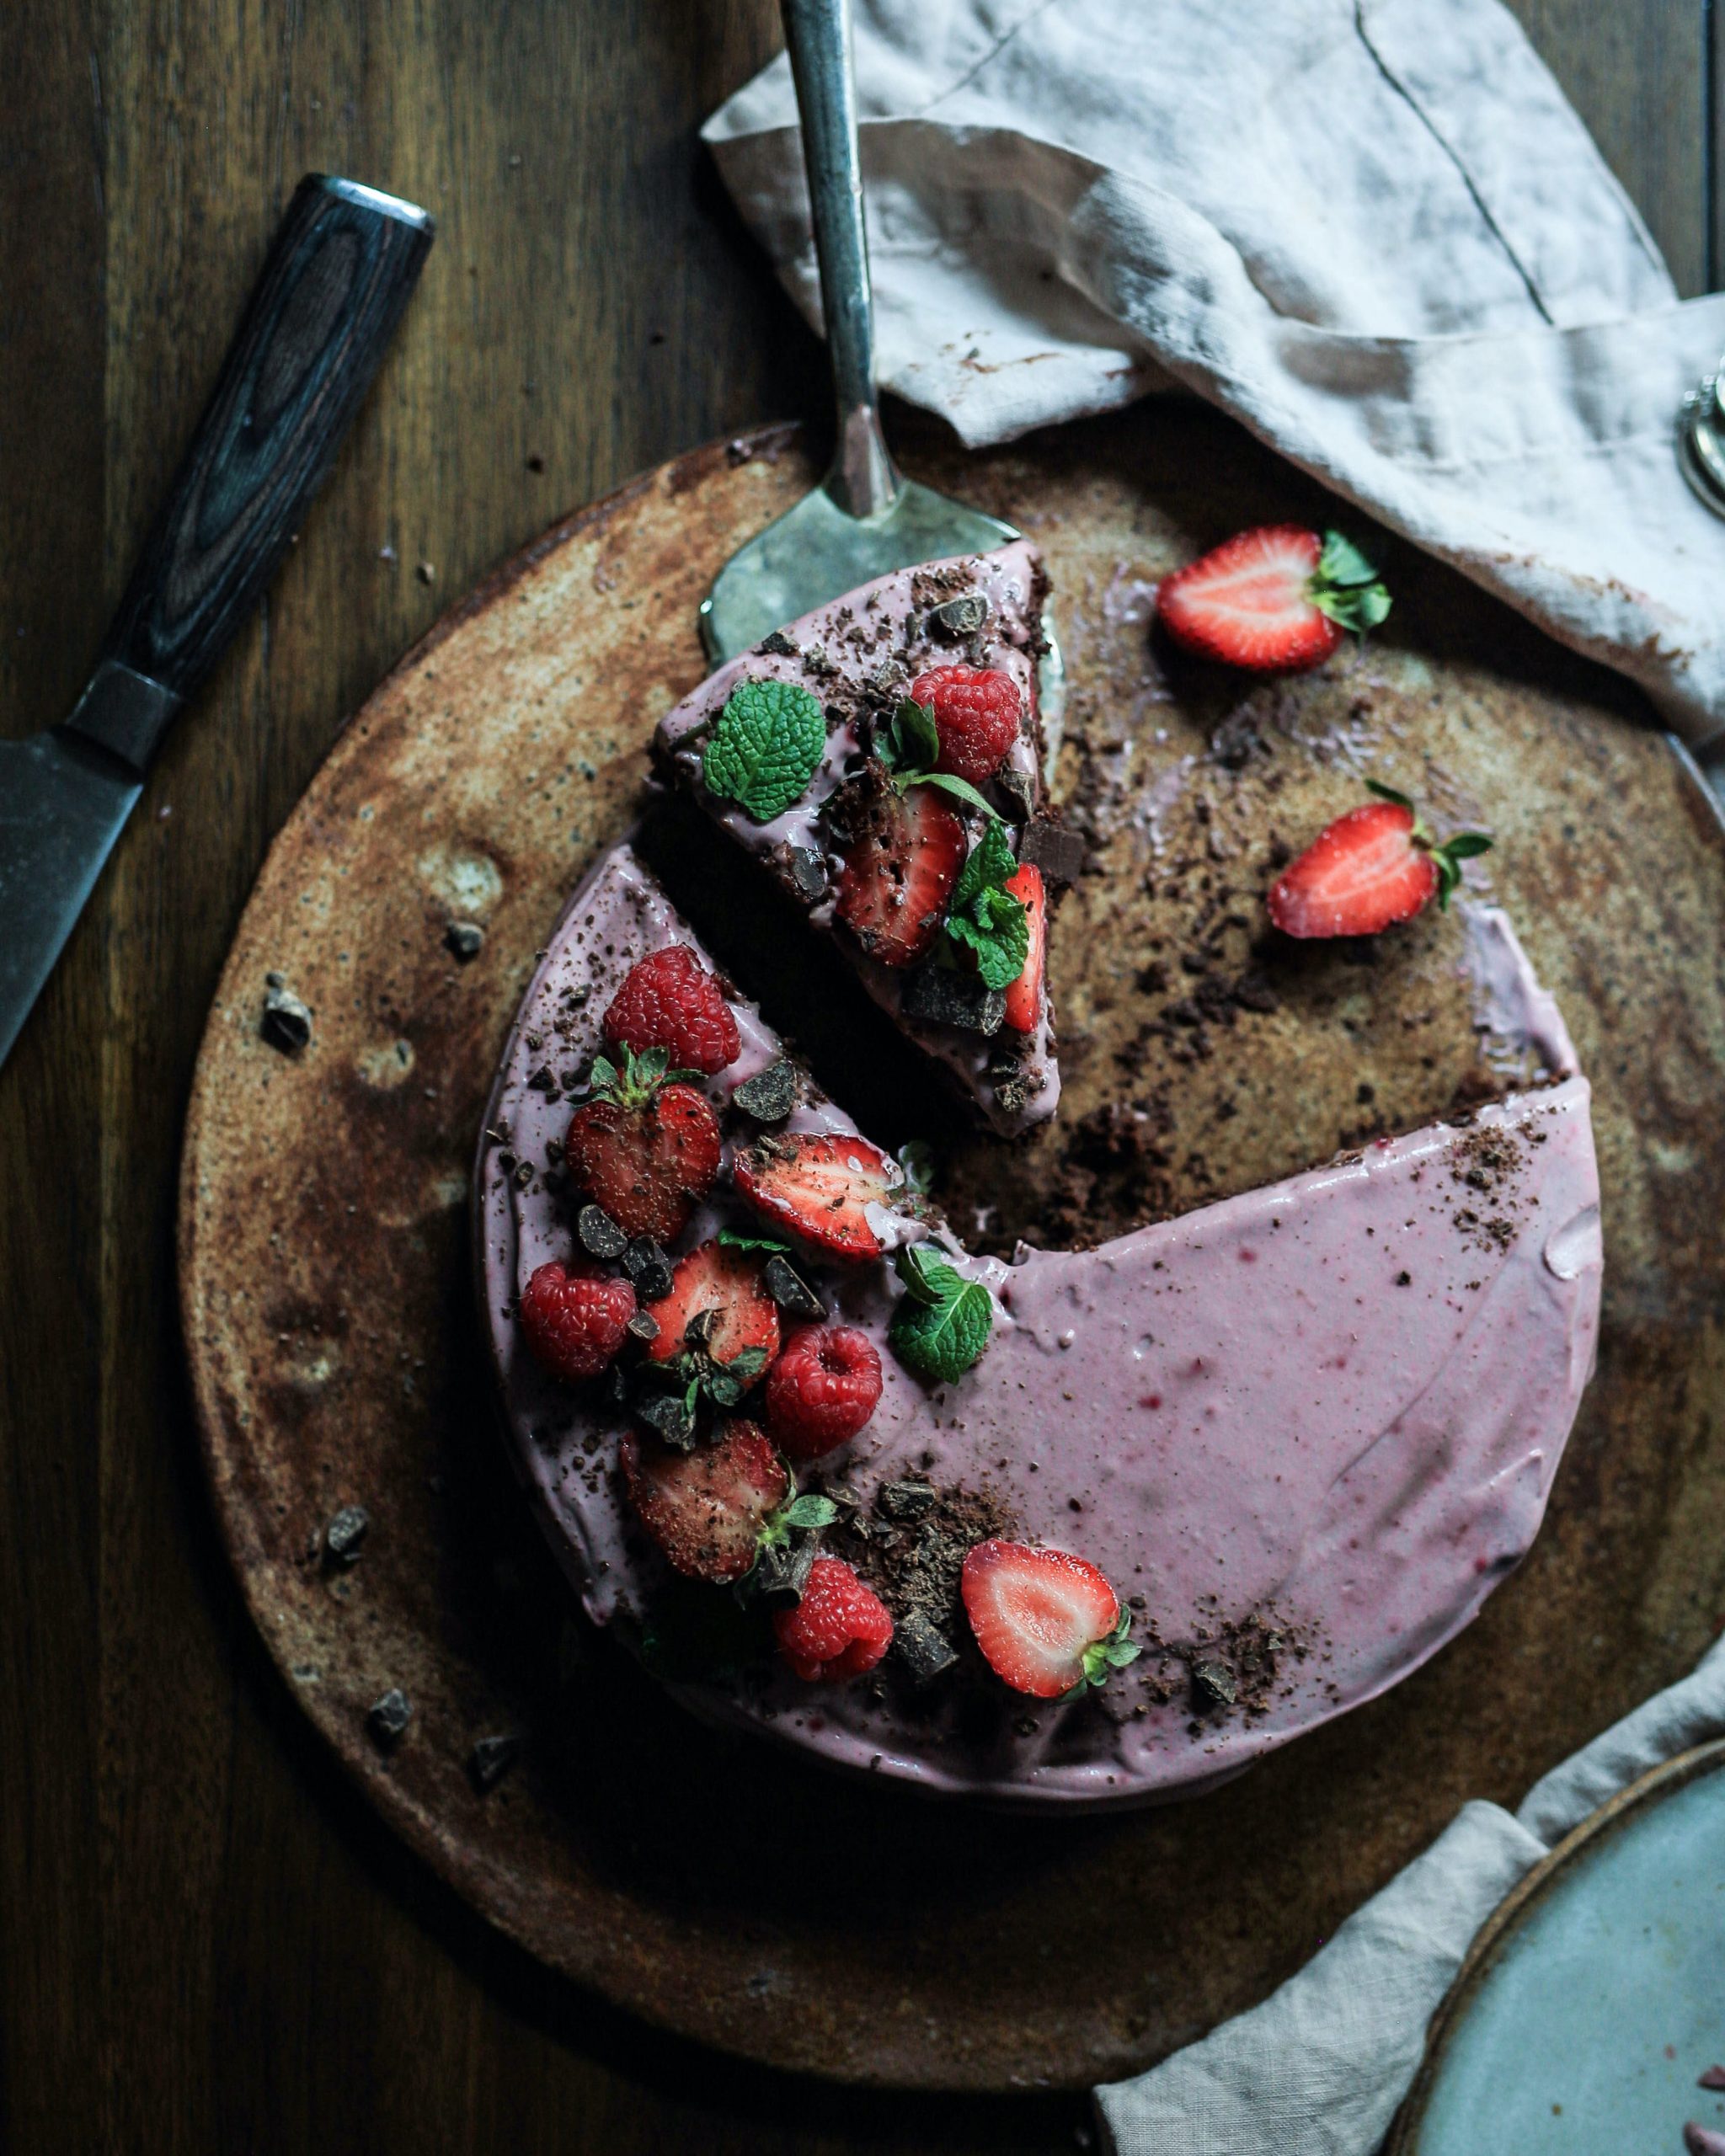 color photograph of a partially sliced chocolate cake with purple frosting and strawberries